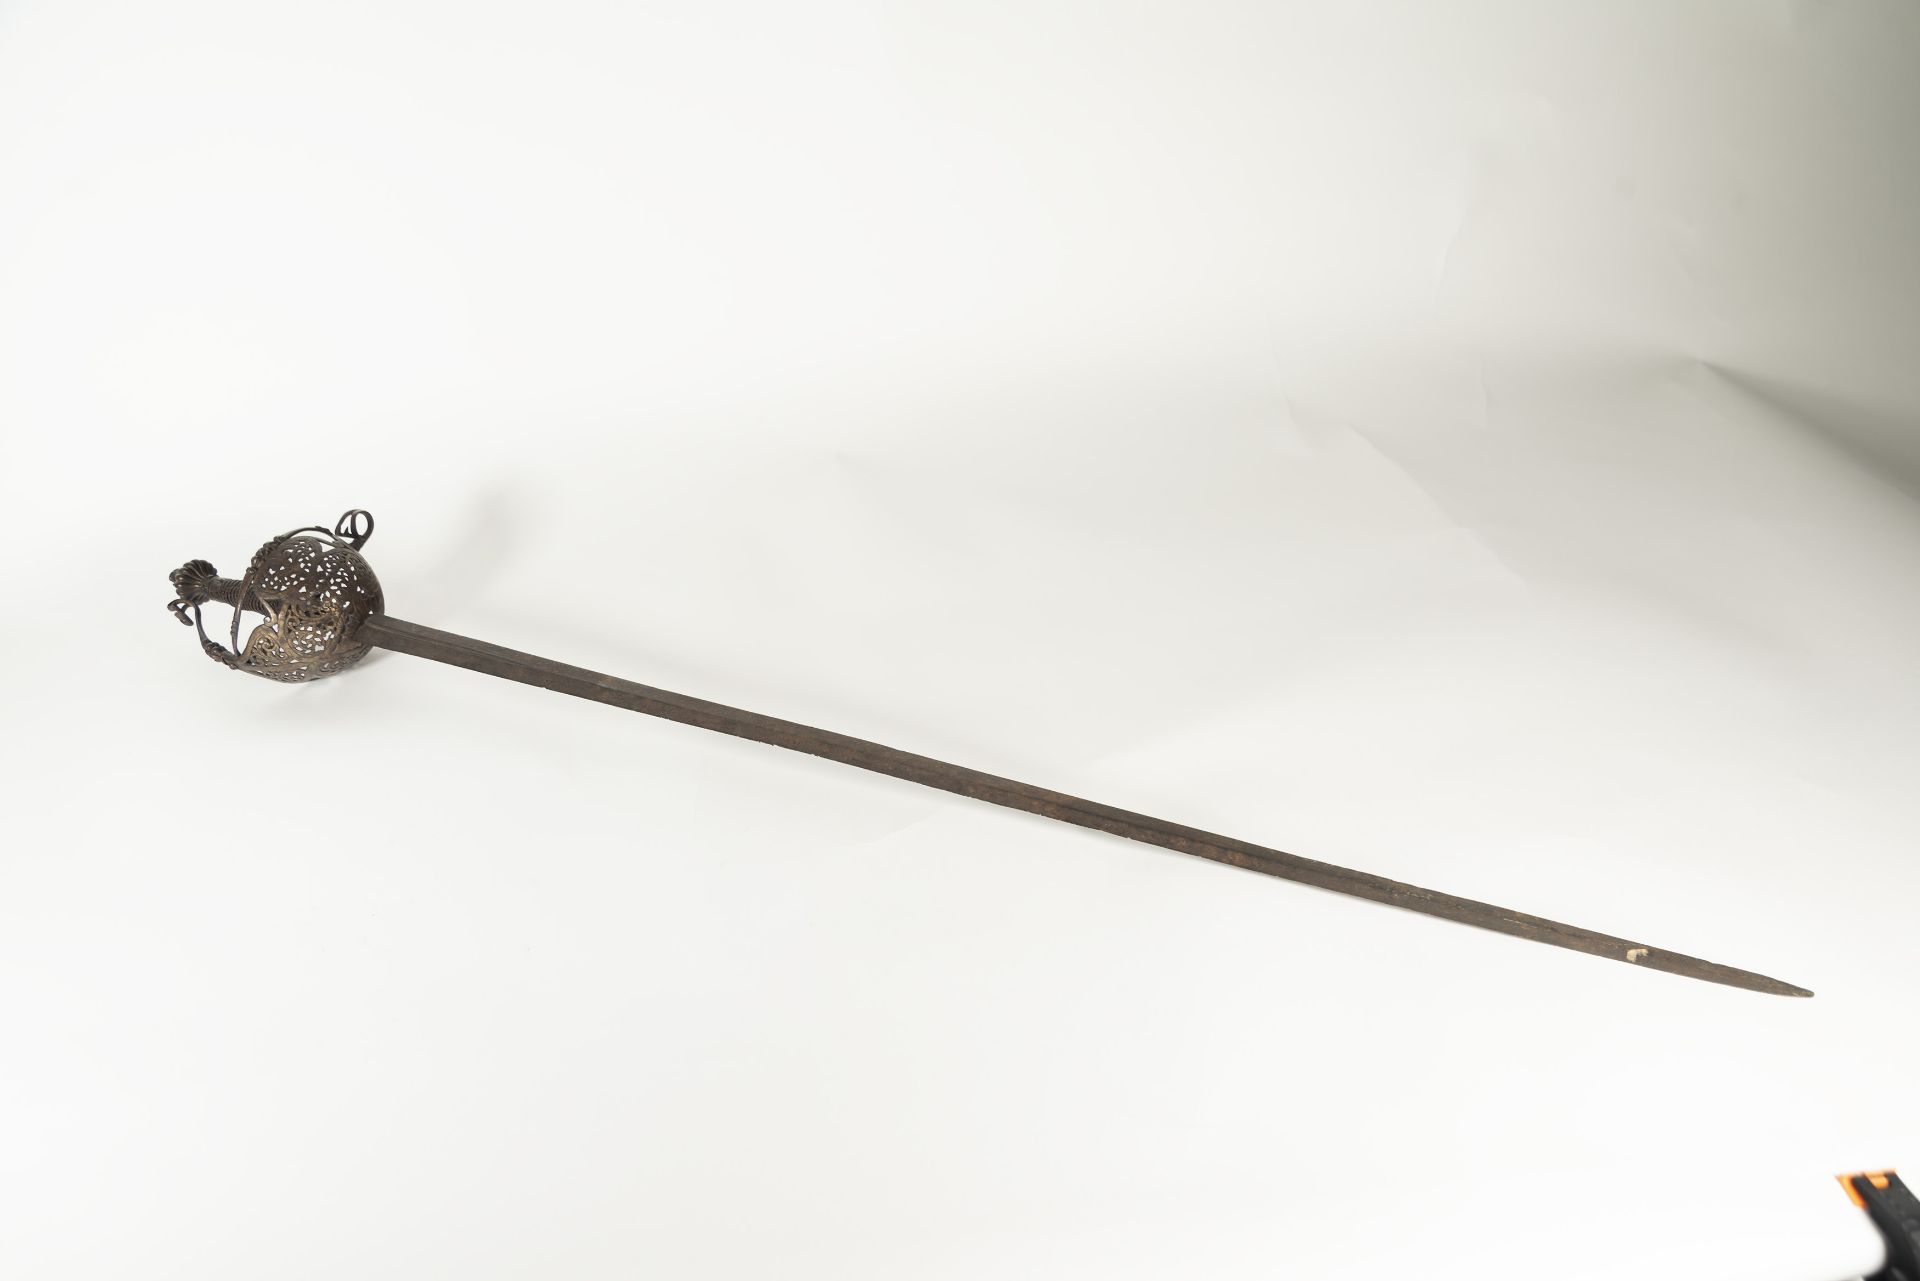 Old Spanish sword, with possibly later blade, 19th - early 20th centuries, Spain